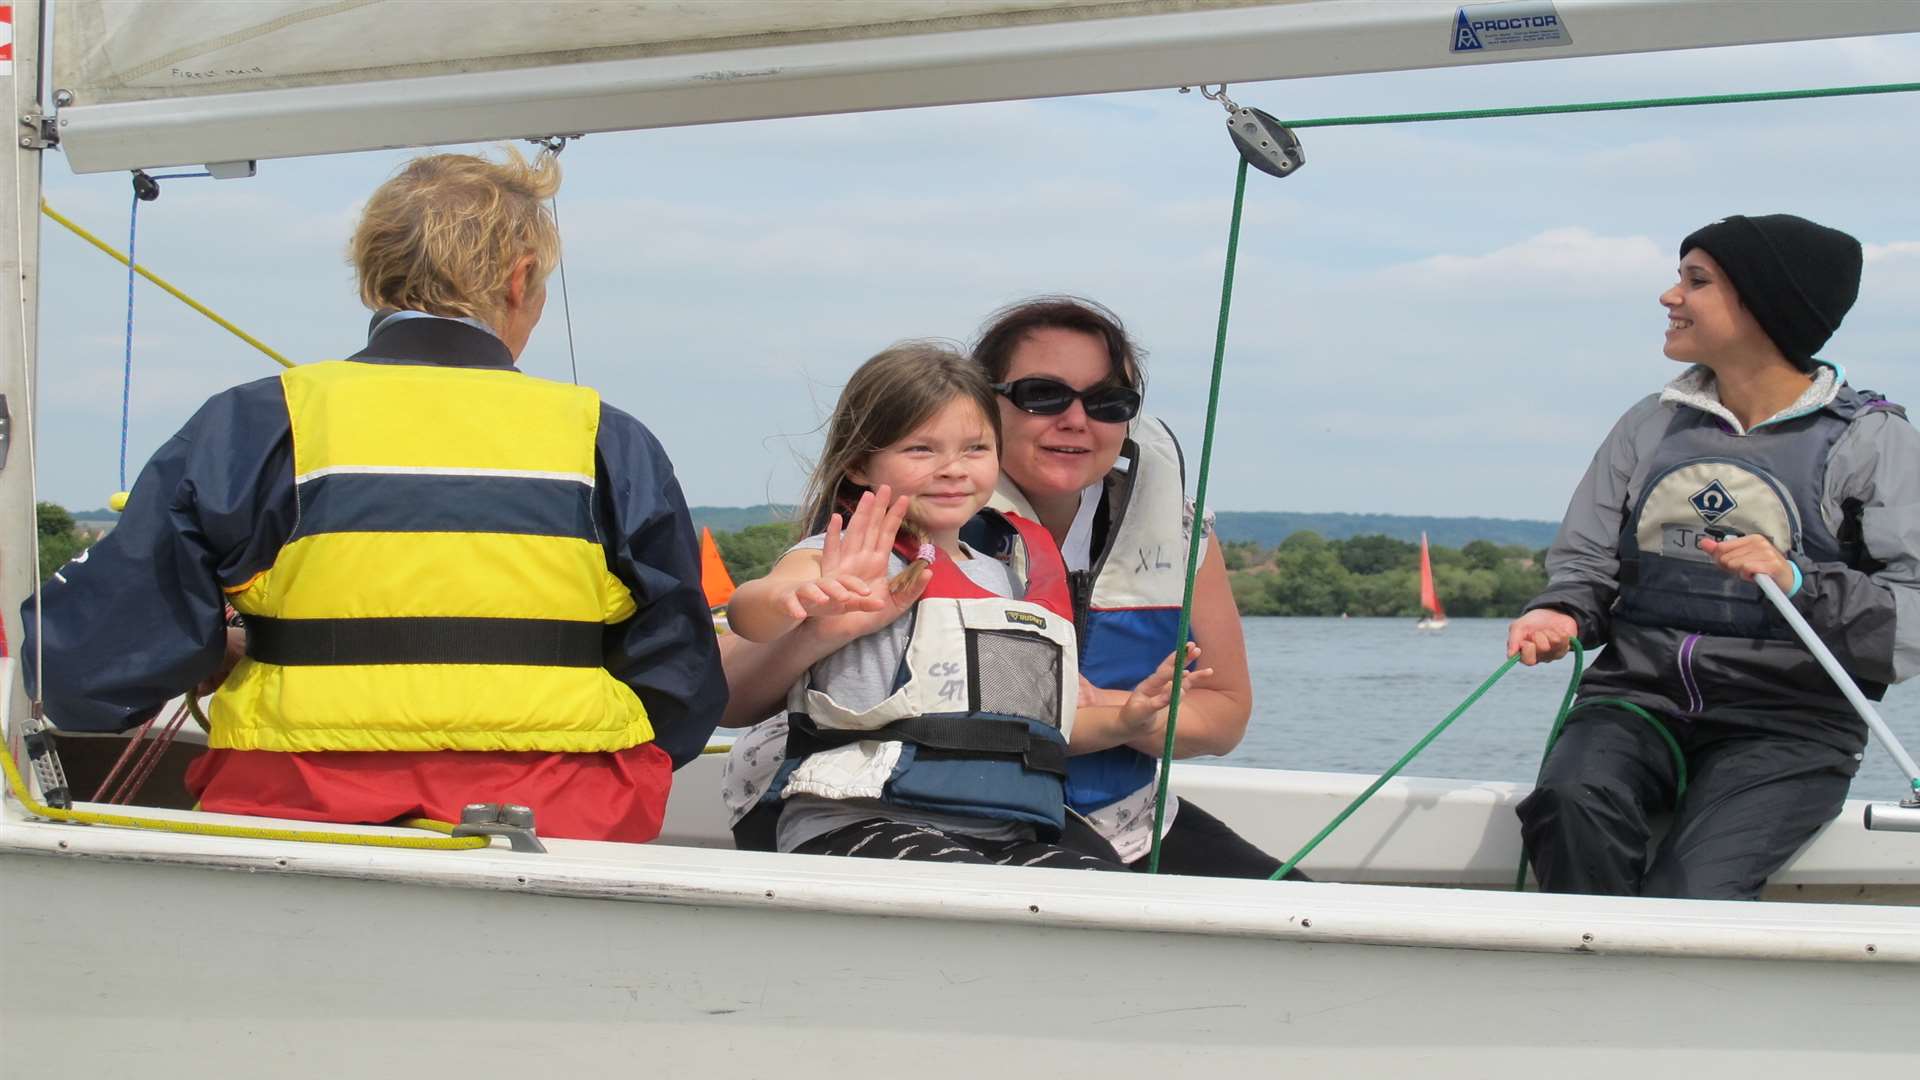 All smiles afloat with Cherished Memories at Wealden Sailability